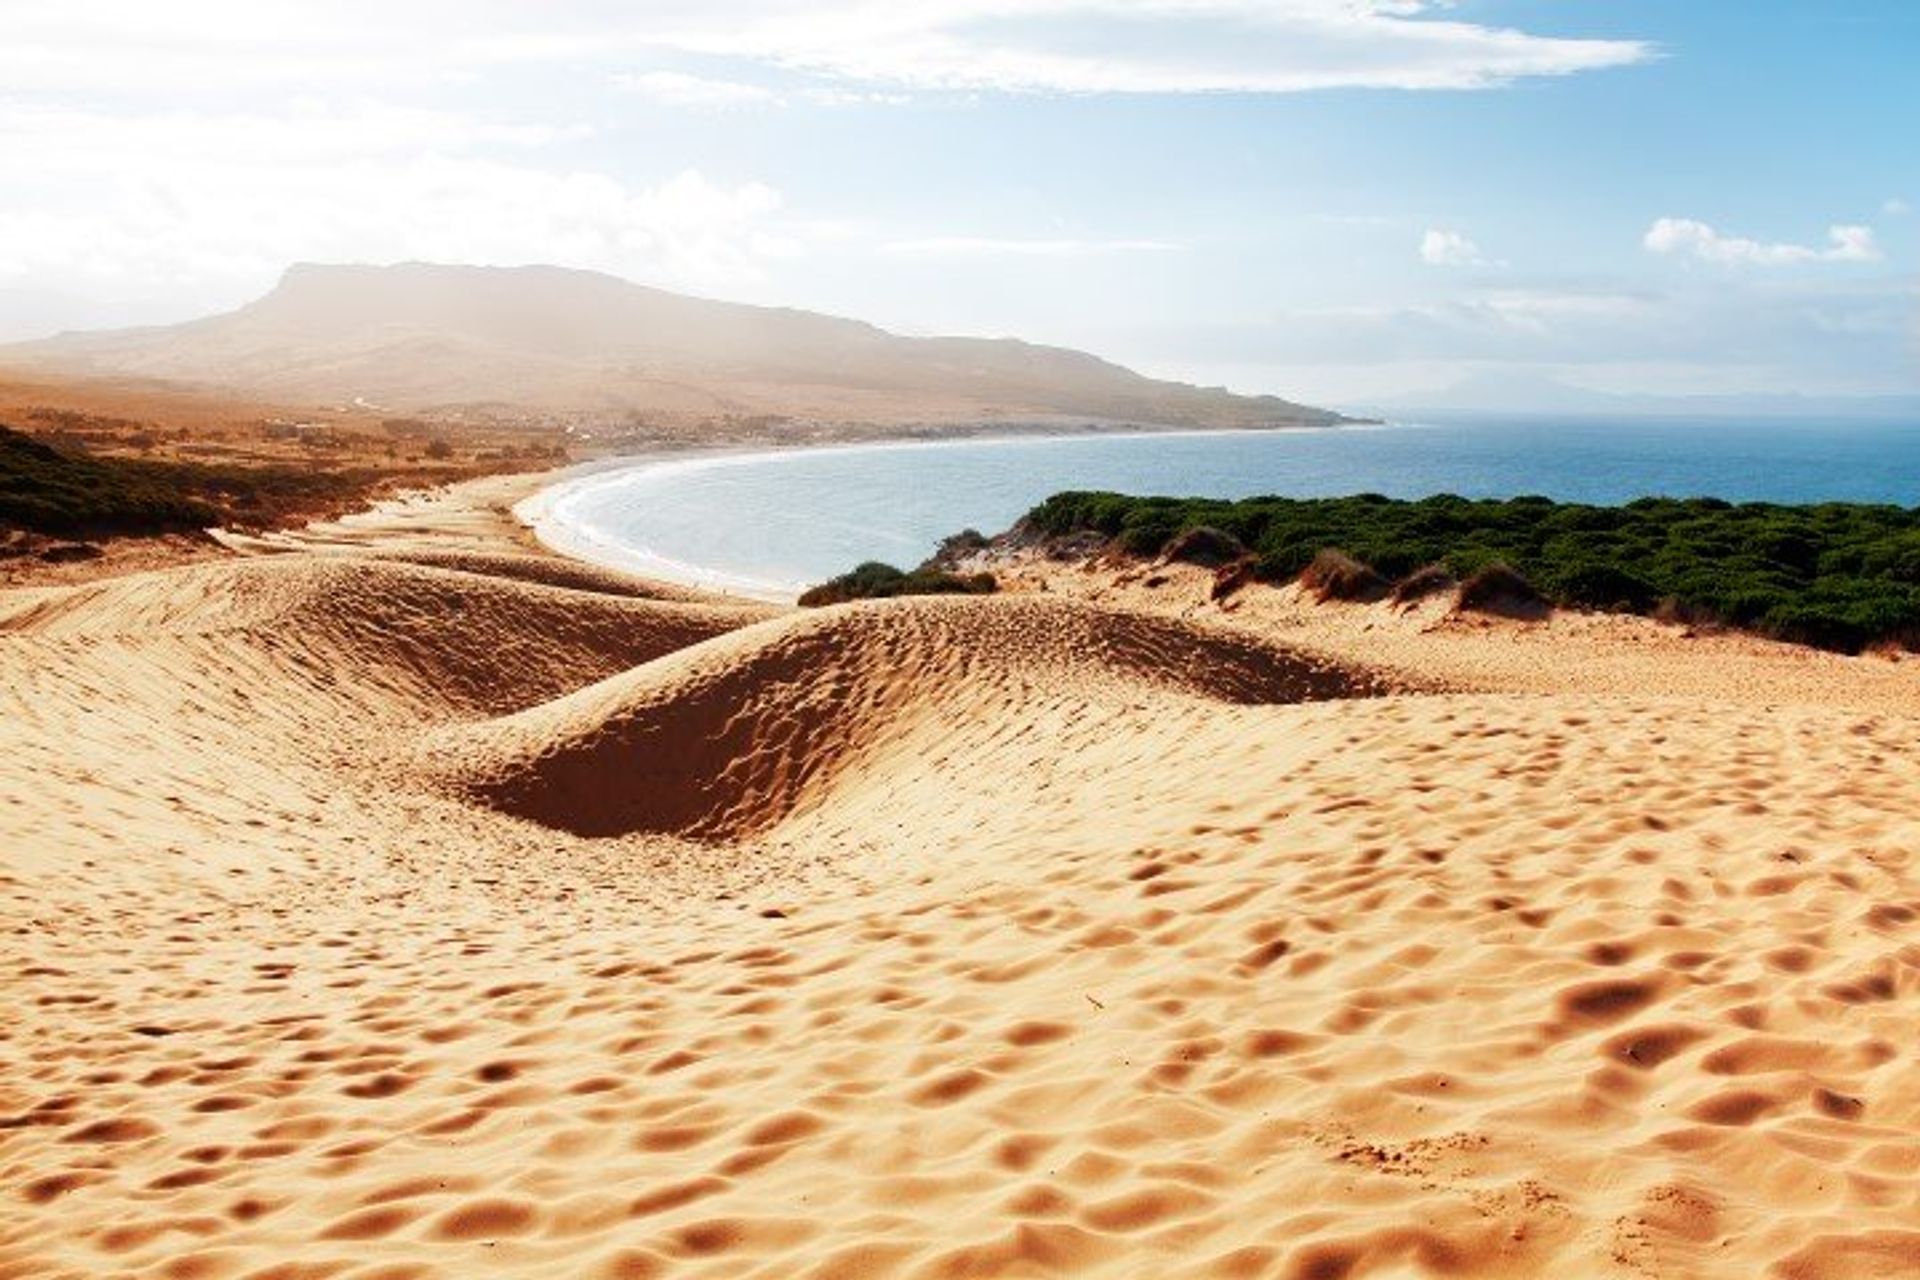 Visit the sand dunes of Bolonia Beach in Cádiz and watch the sunset with an evening stroll along the coast